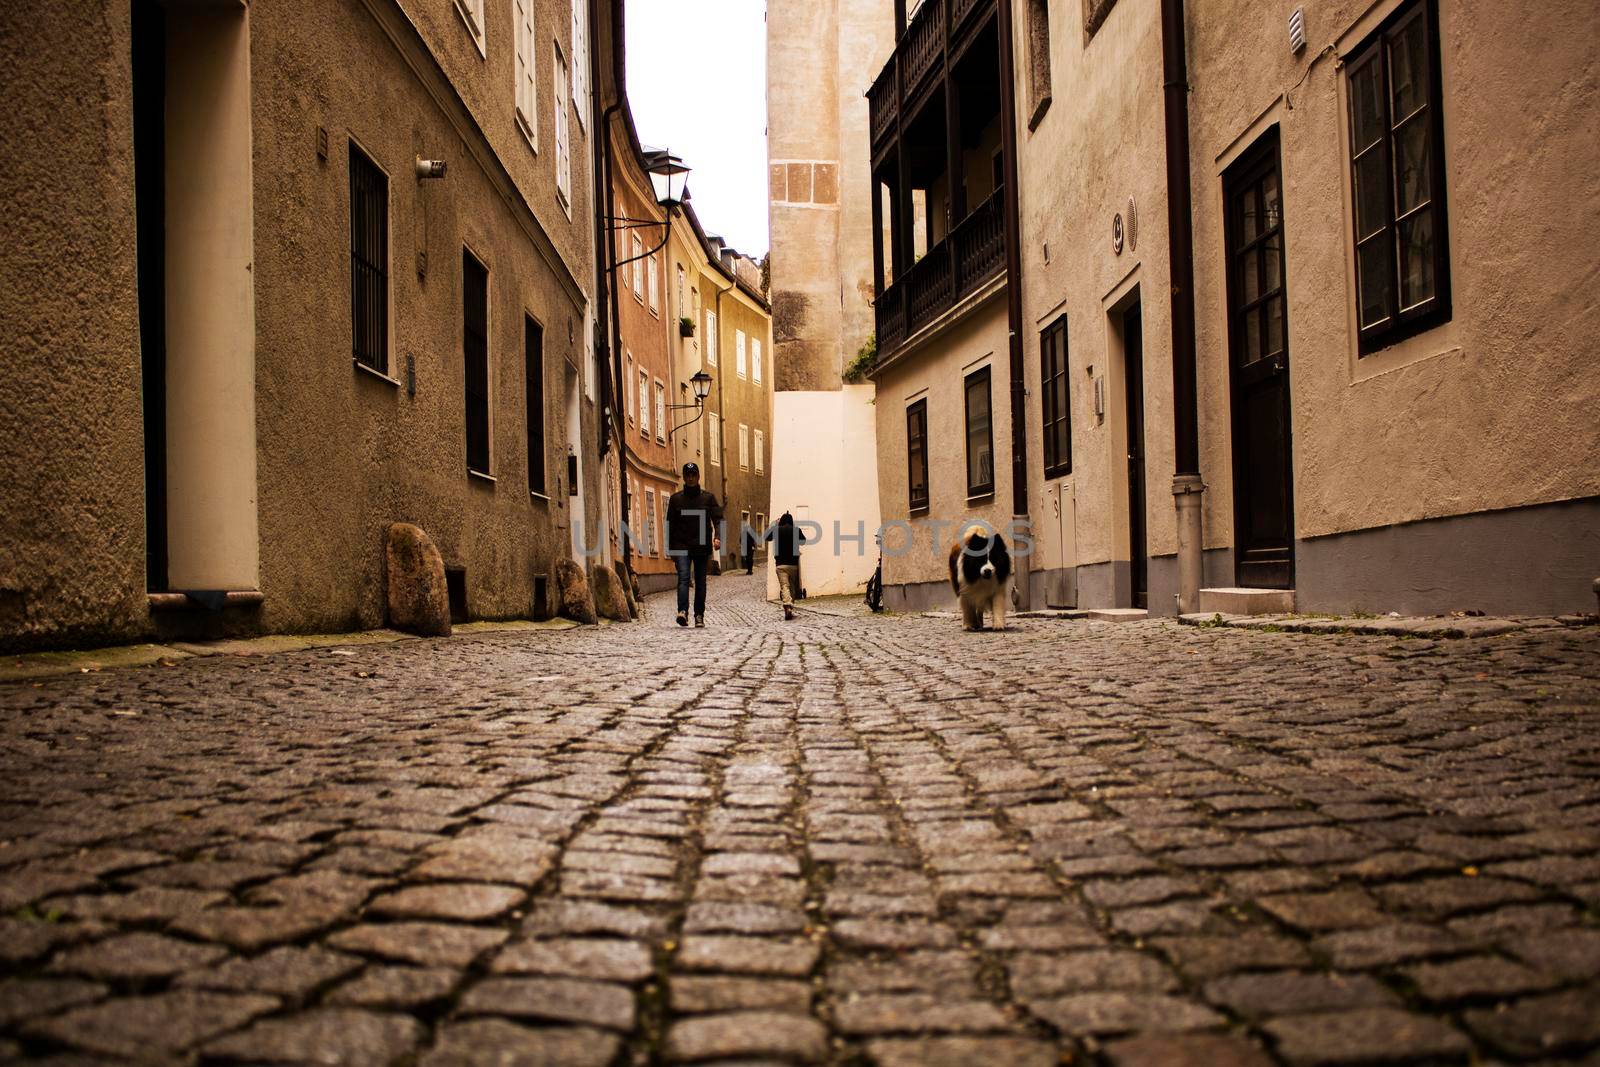 People walking in an old town by ValentimePix